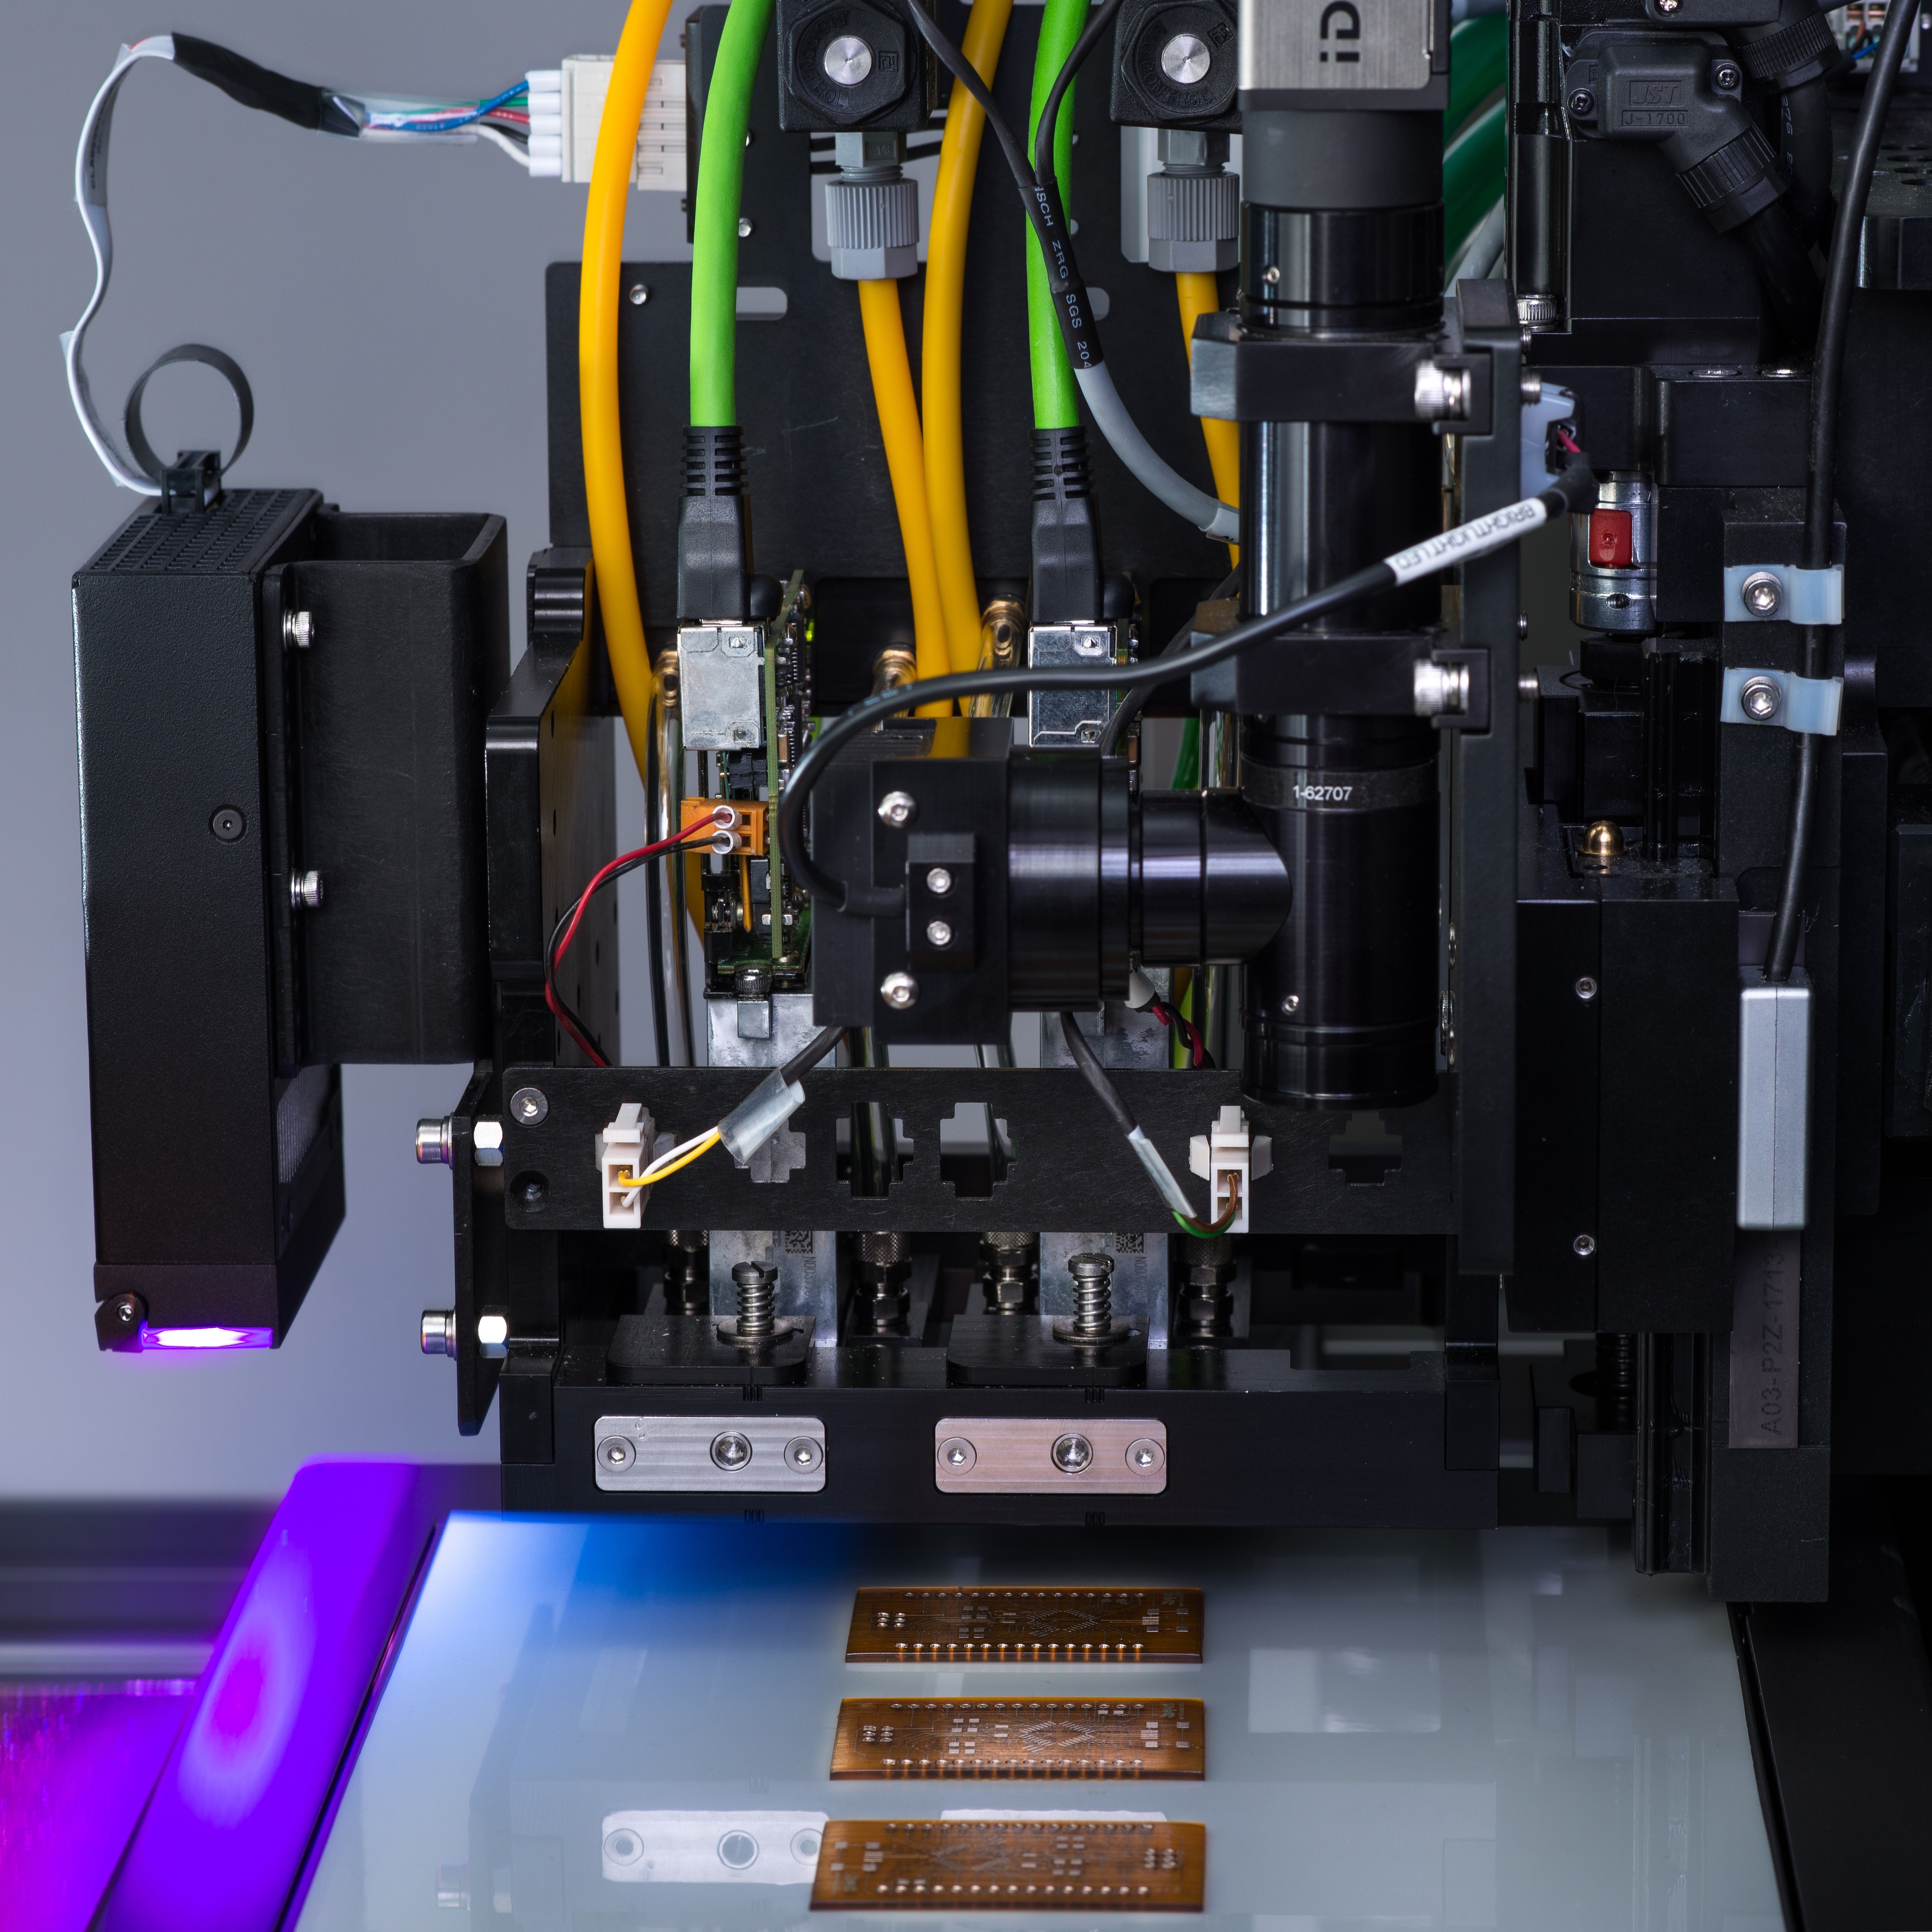 The DragonFly Pro System 3D printing a PCB using inkjet technology, one process to understand in the additive manufacturing vs. 3D printing discussion.